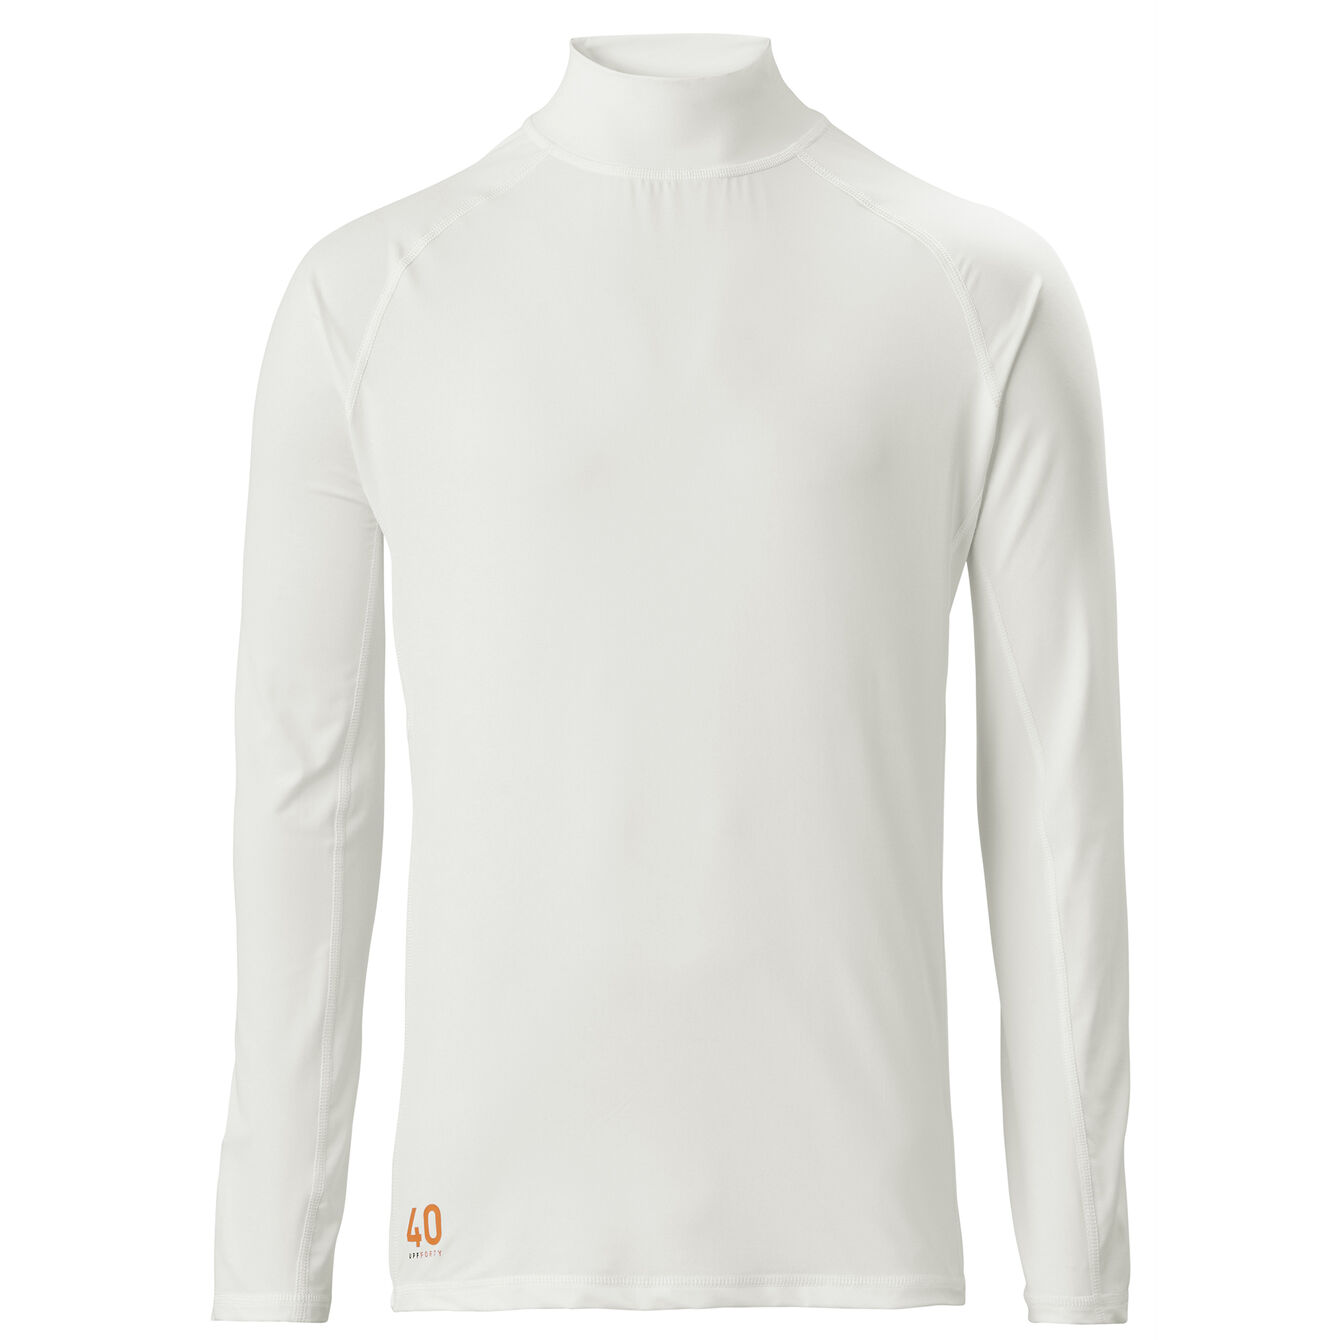 MUSTO QUICK DRY PERFORMANCE LONG SLEEVE T-SHIRT